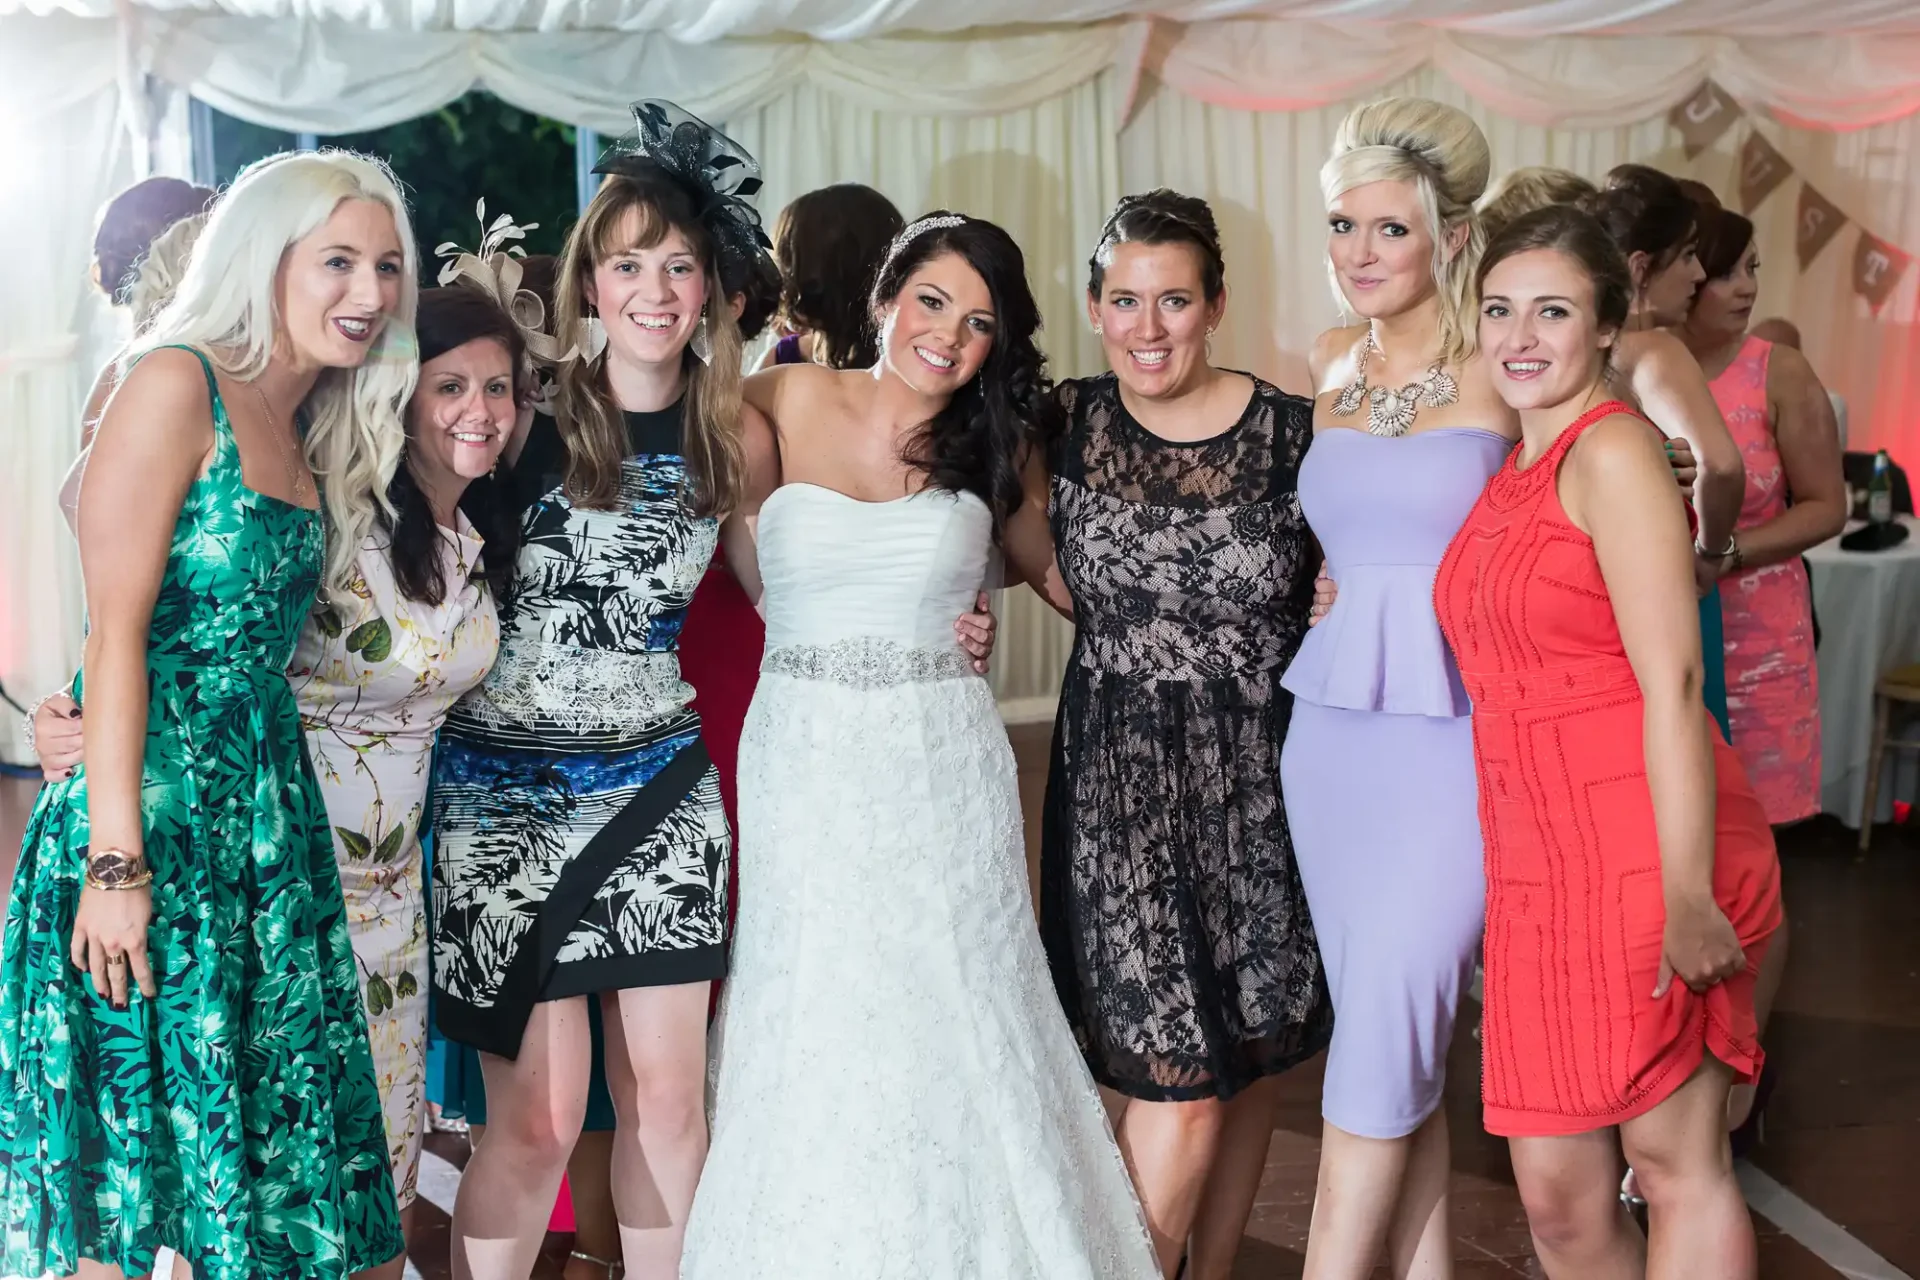 A bride in a white dress surrounded by six women in various colorful dresses, smiling together at a wedding reception.